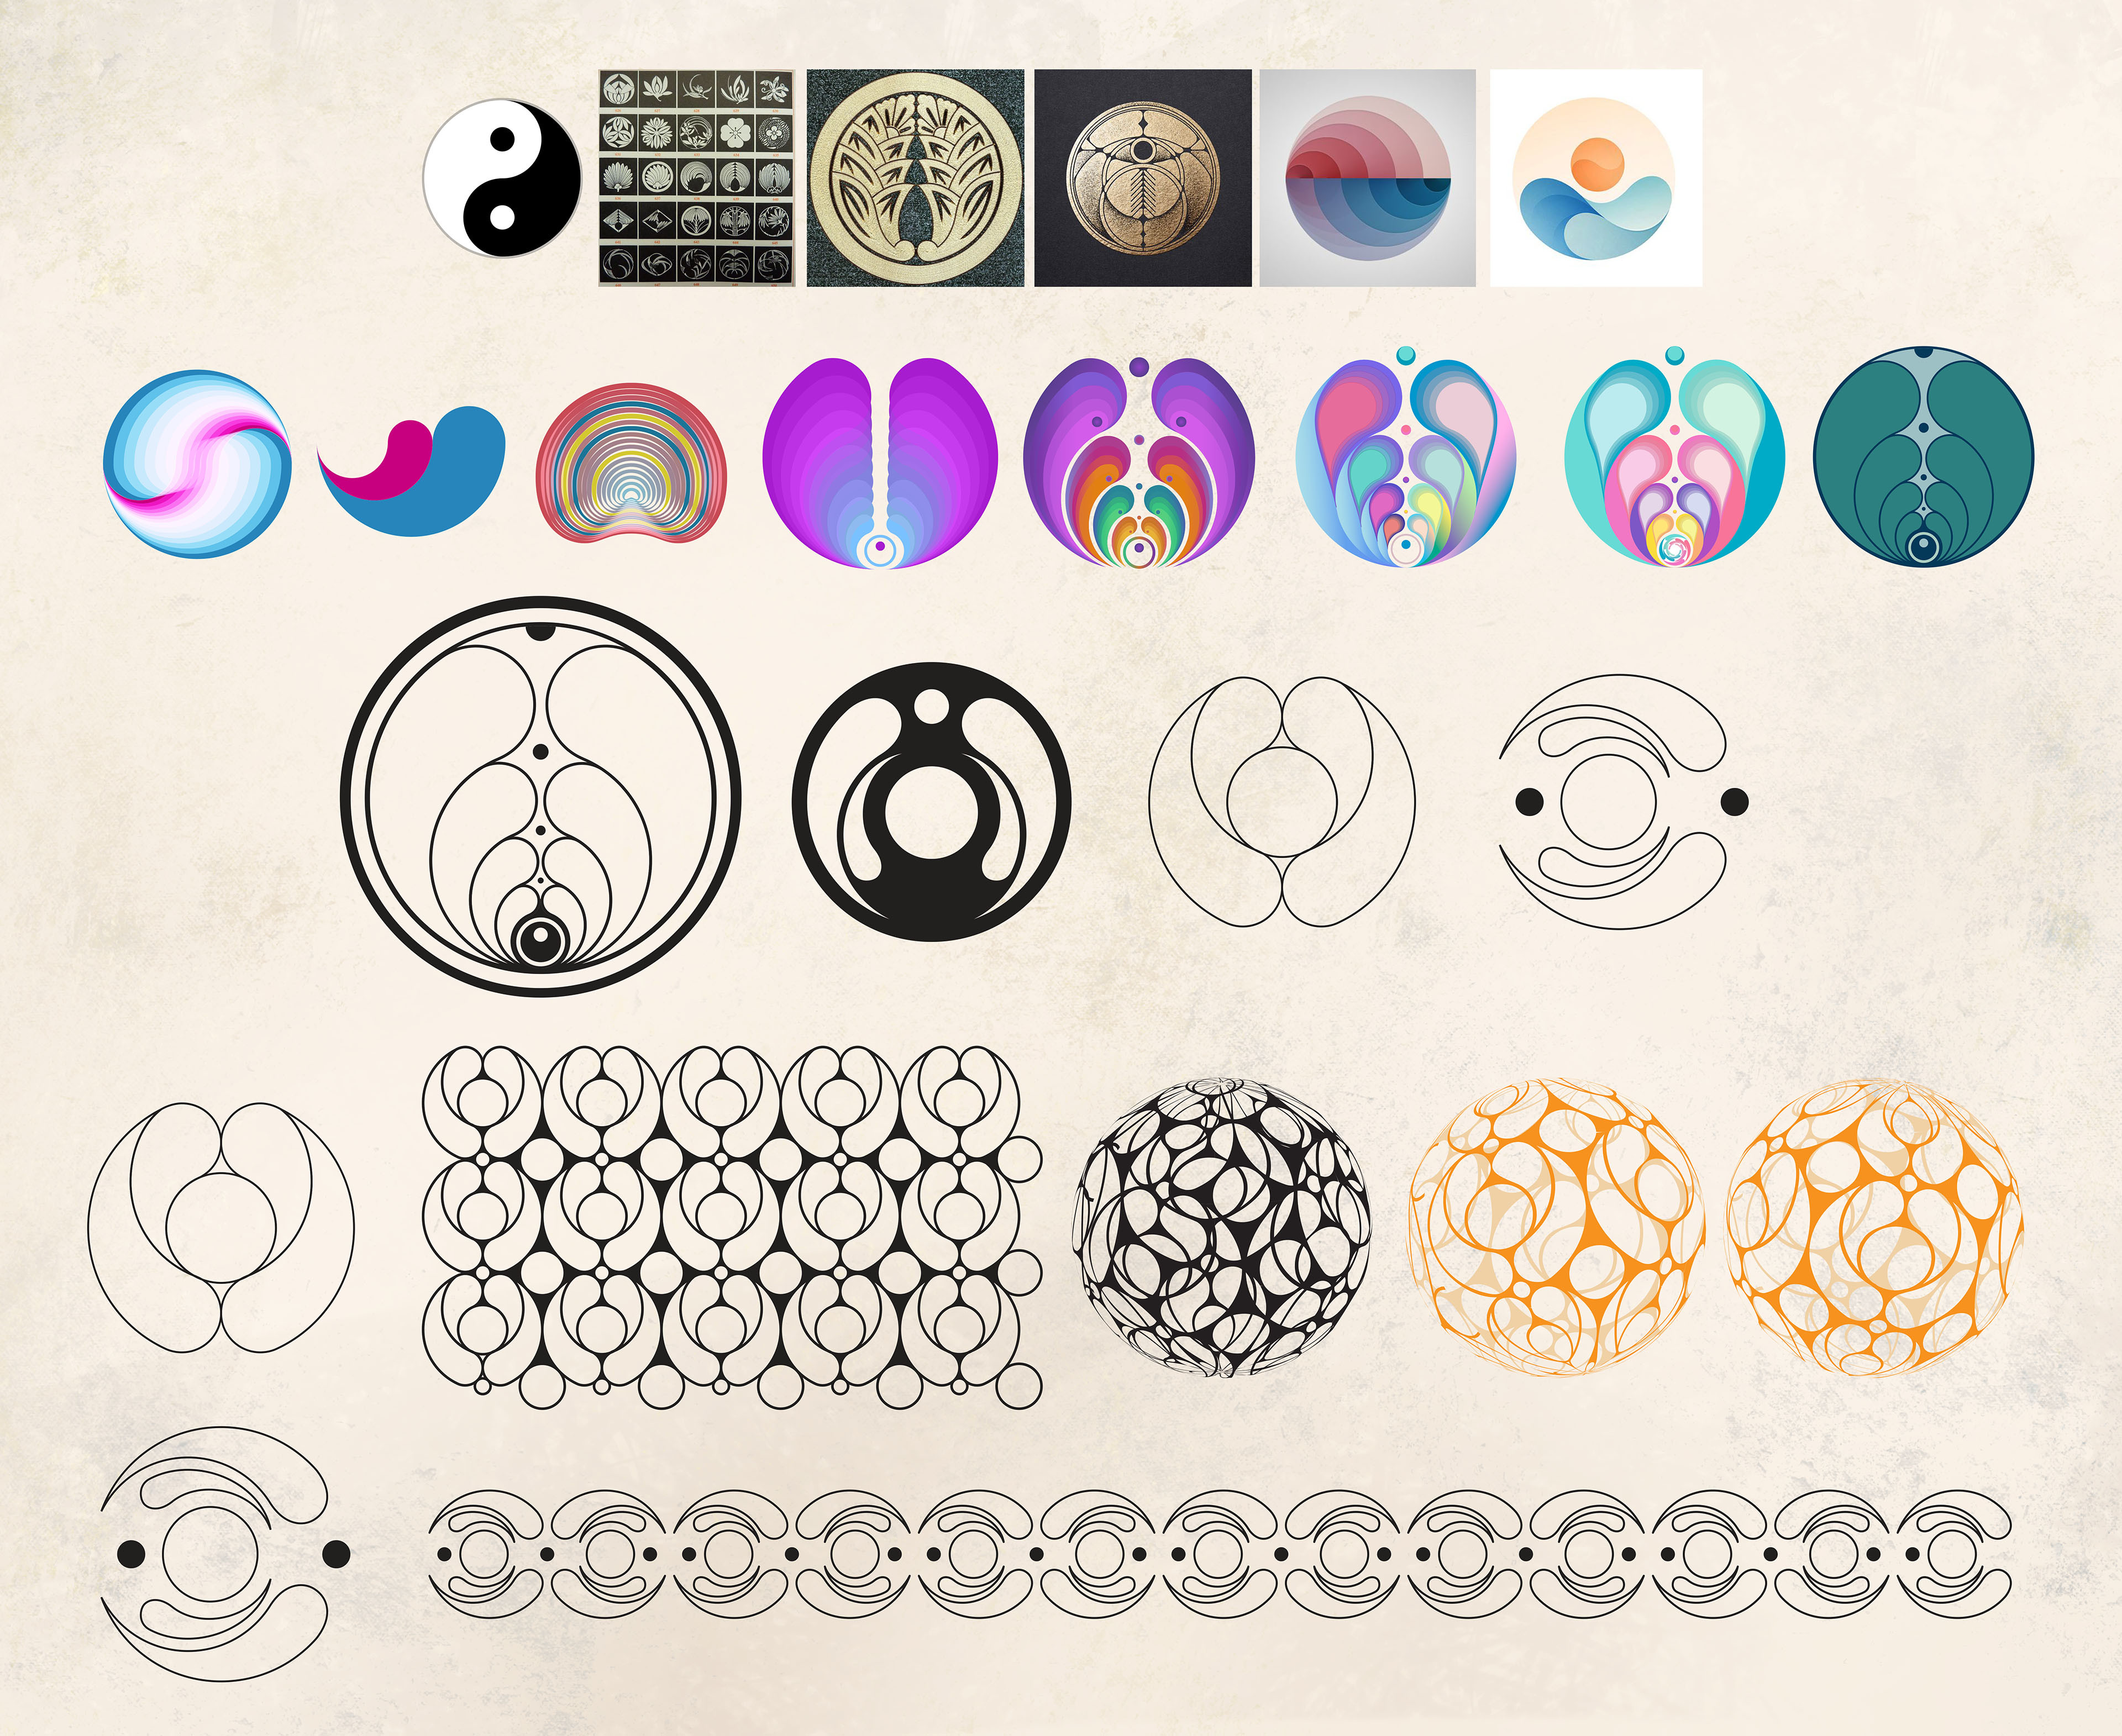 Iconography and Pattern Design.